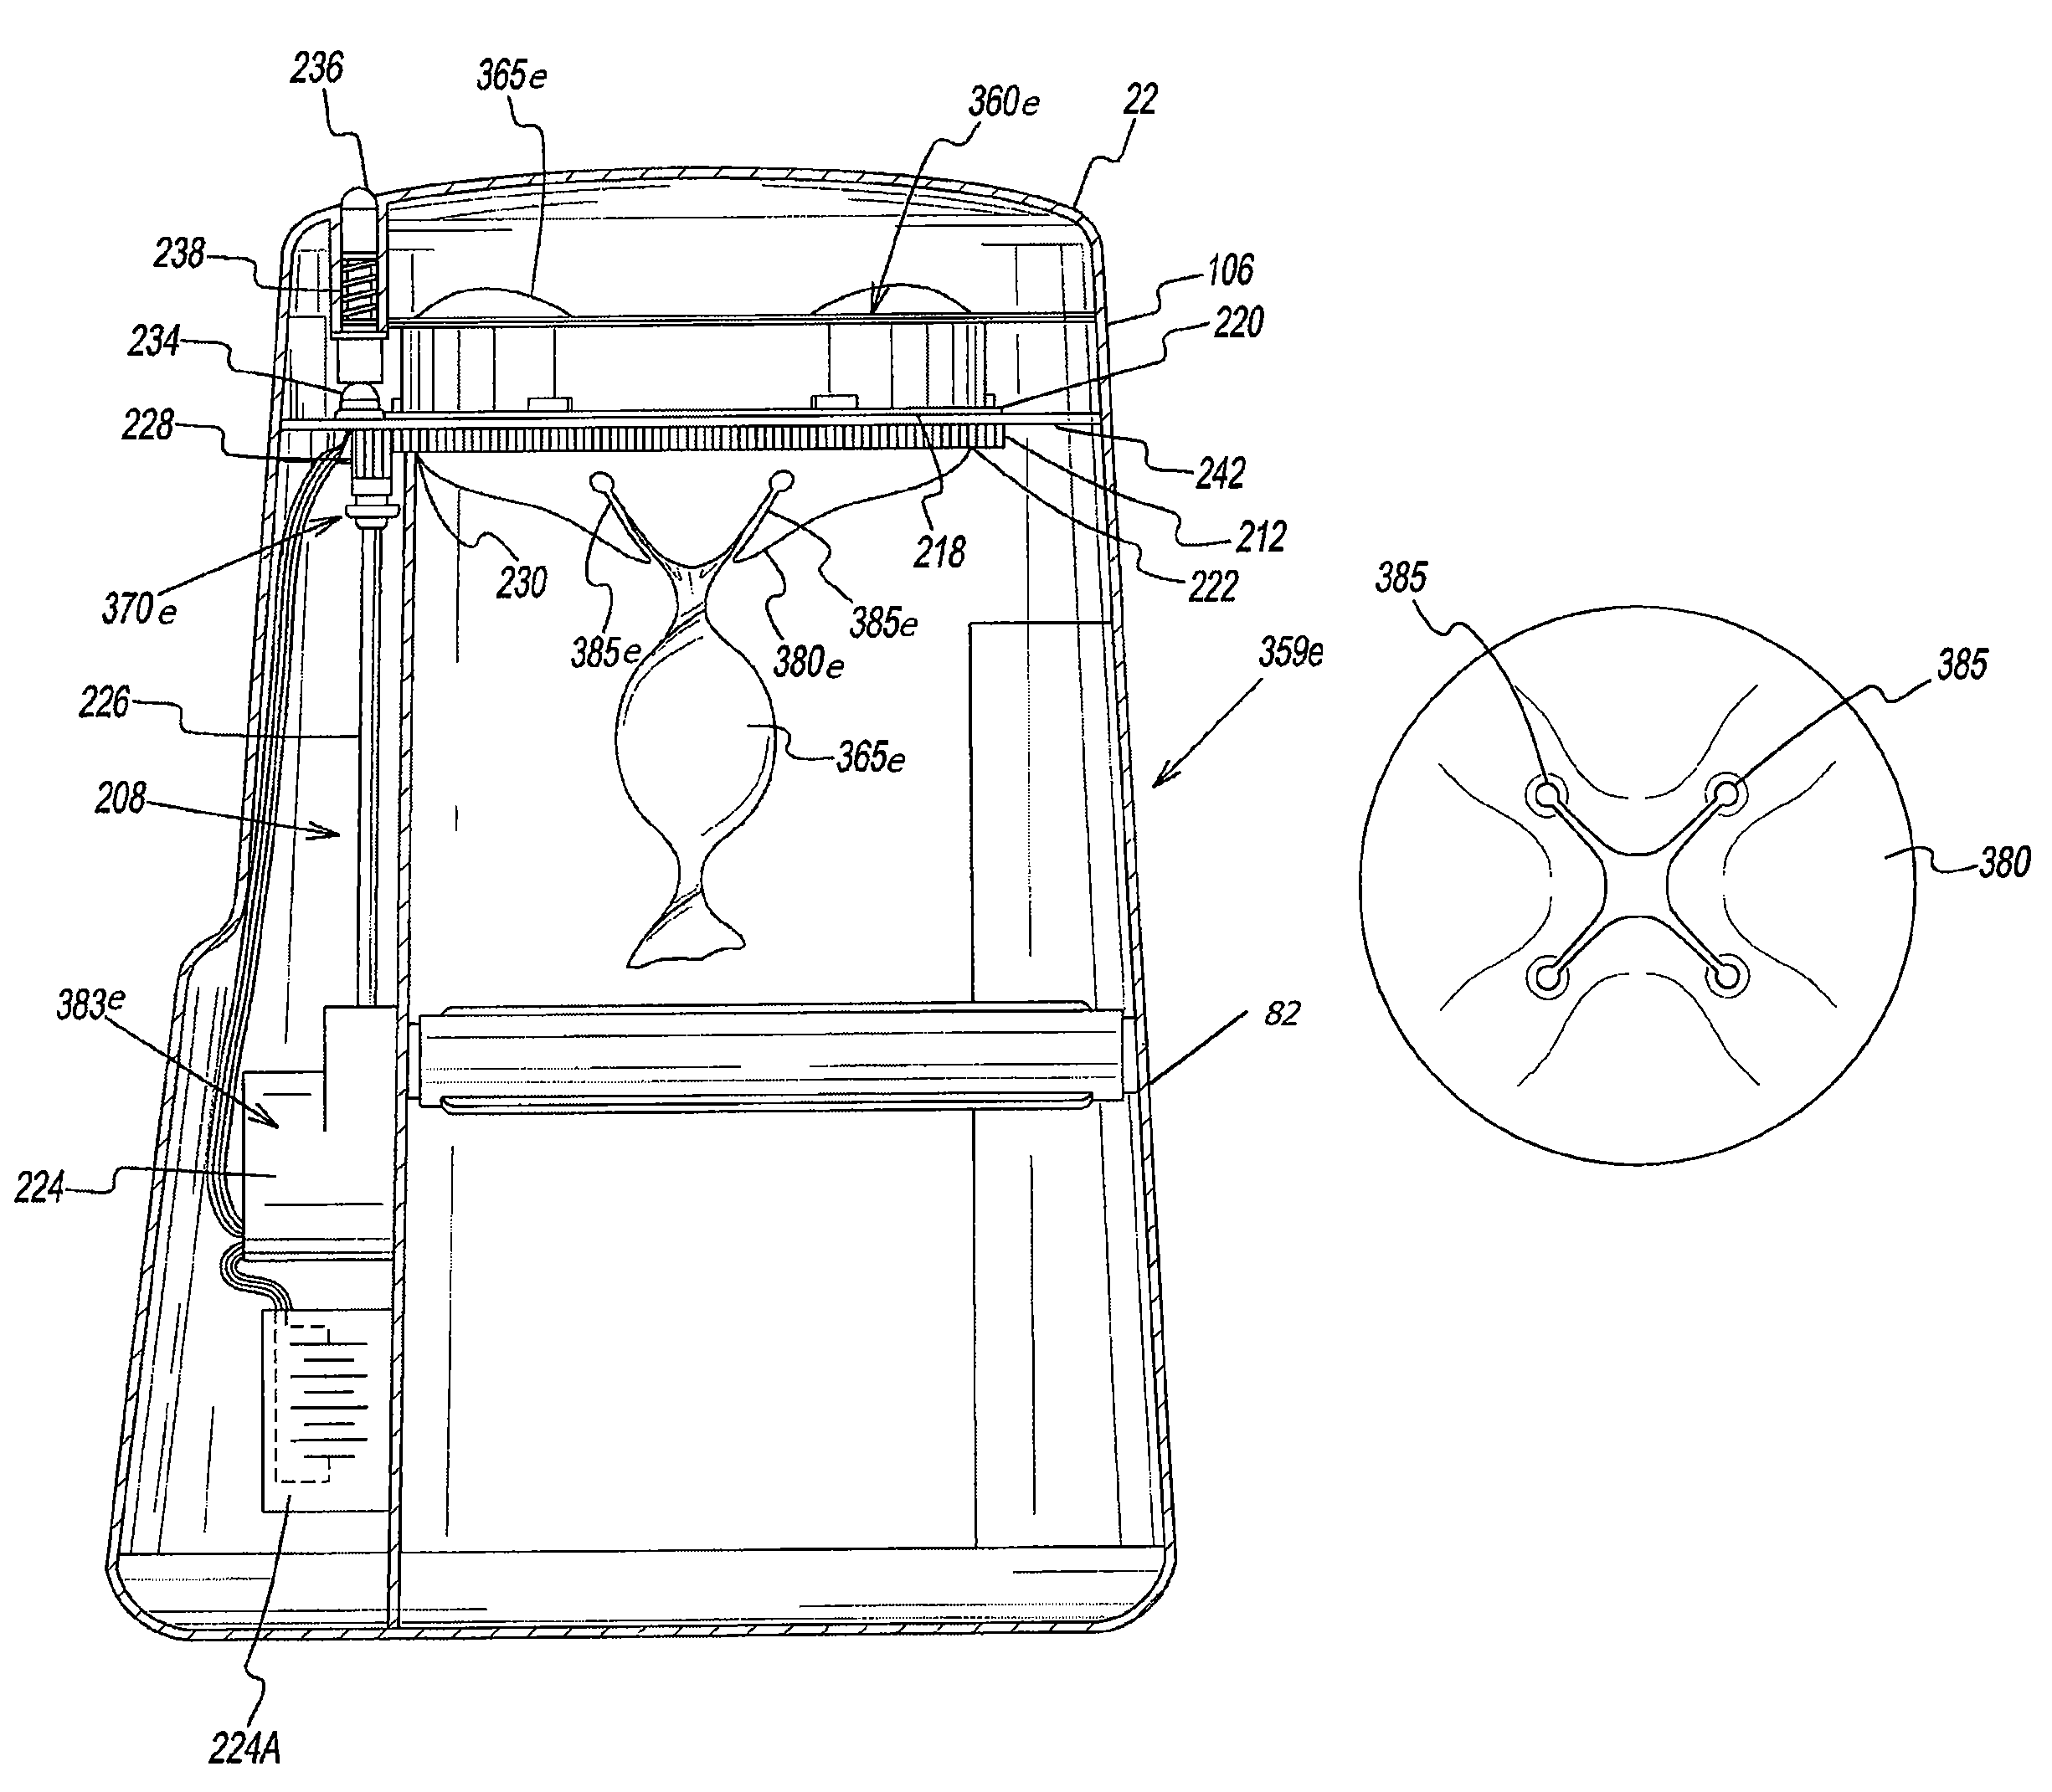 Waste disposal device including a diaphragm for twisting a flexible tubing dispensed from a cartridge